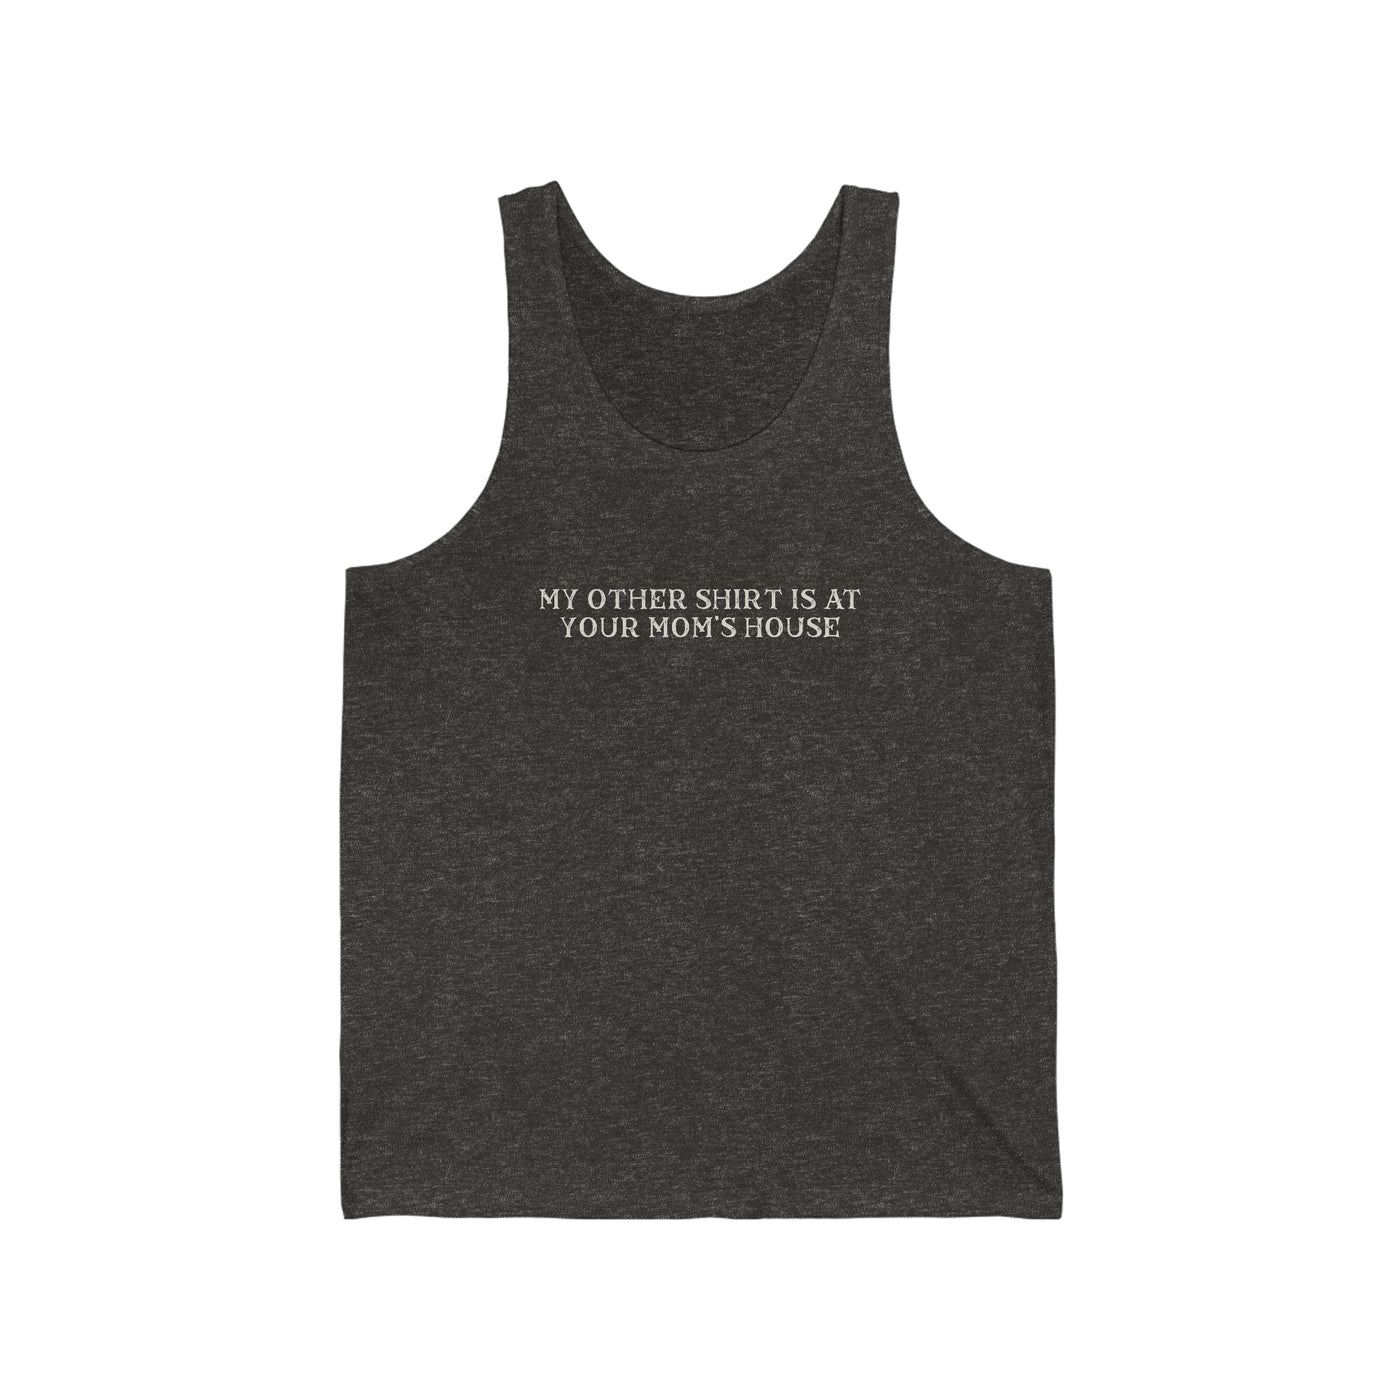 My Other Shirt Is At Your Mom's House Unisex Tank Top